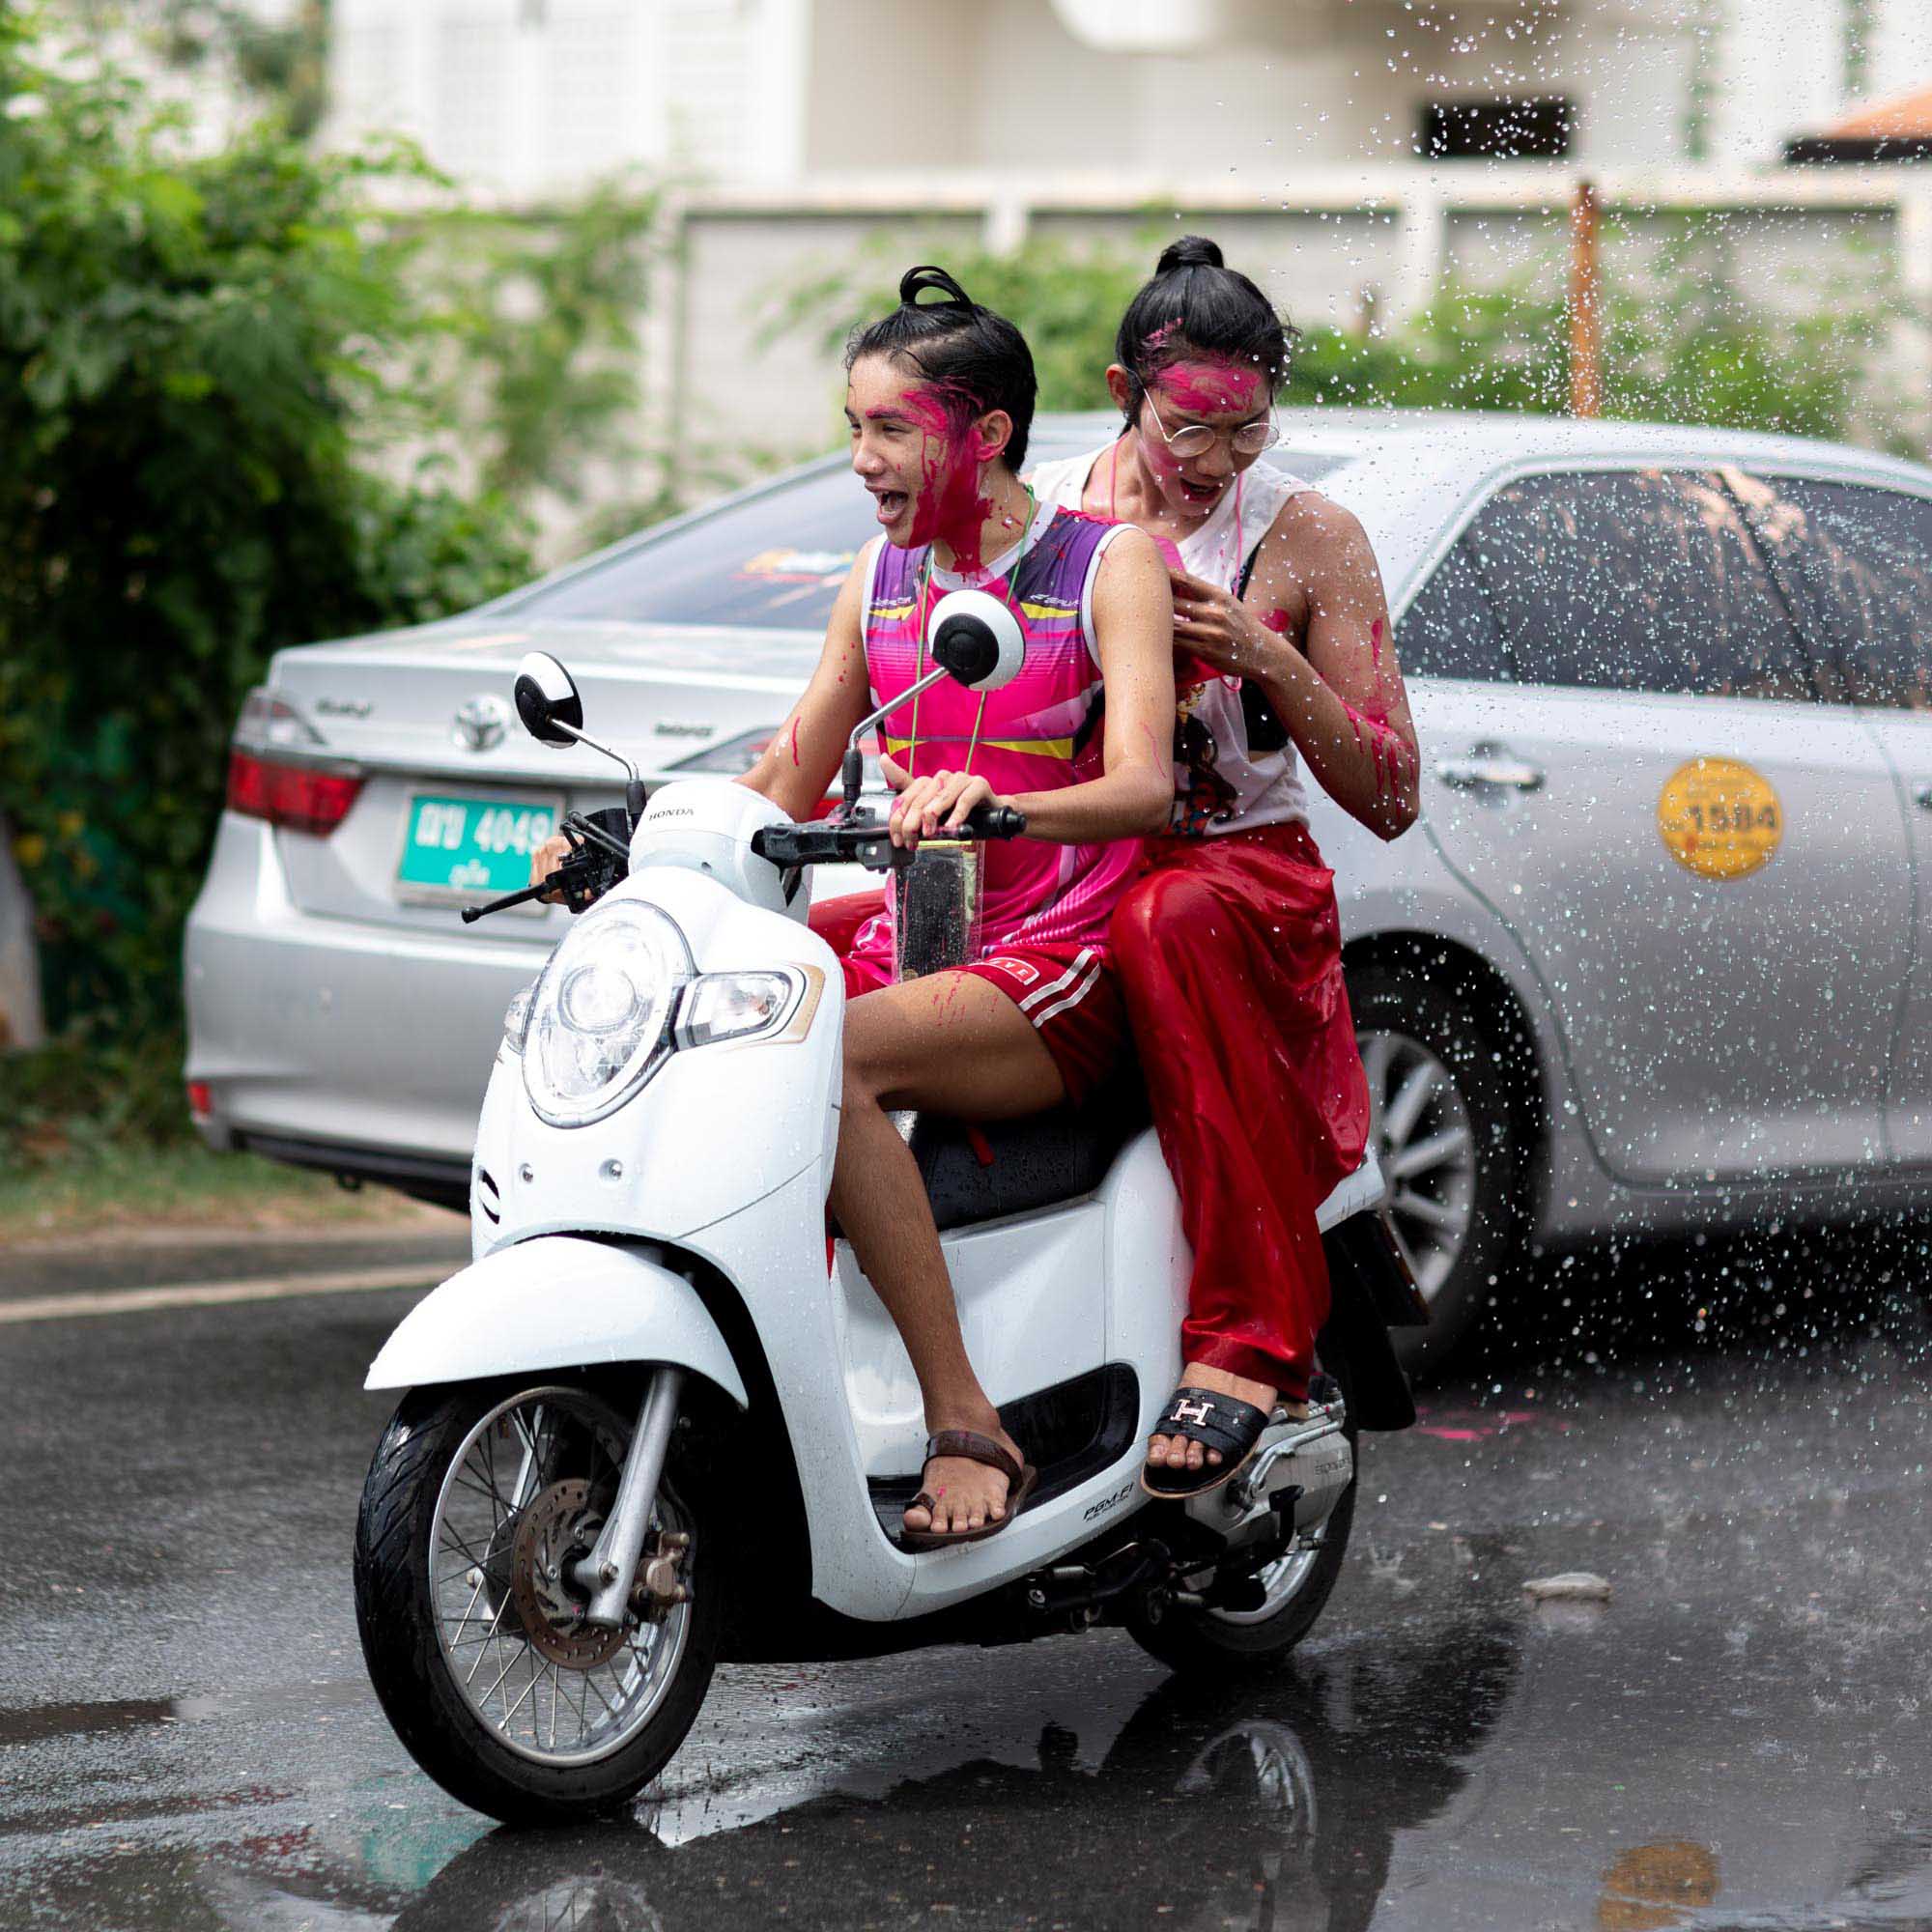 Two Thai women on scooter with painted faces during Songkran water festival in Phuket, Thailand | Street Photography | Travel Photography | Festival Photography